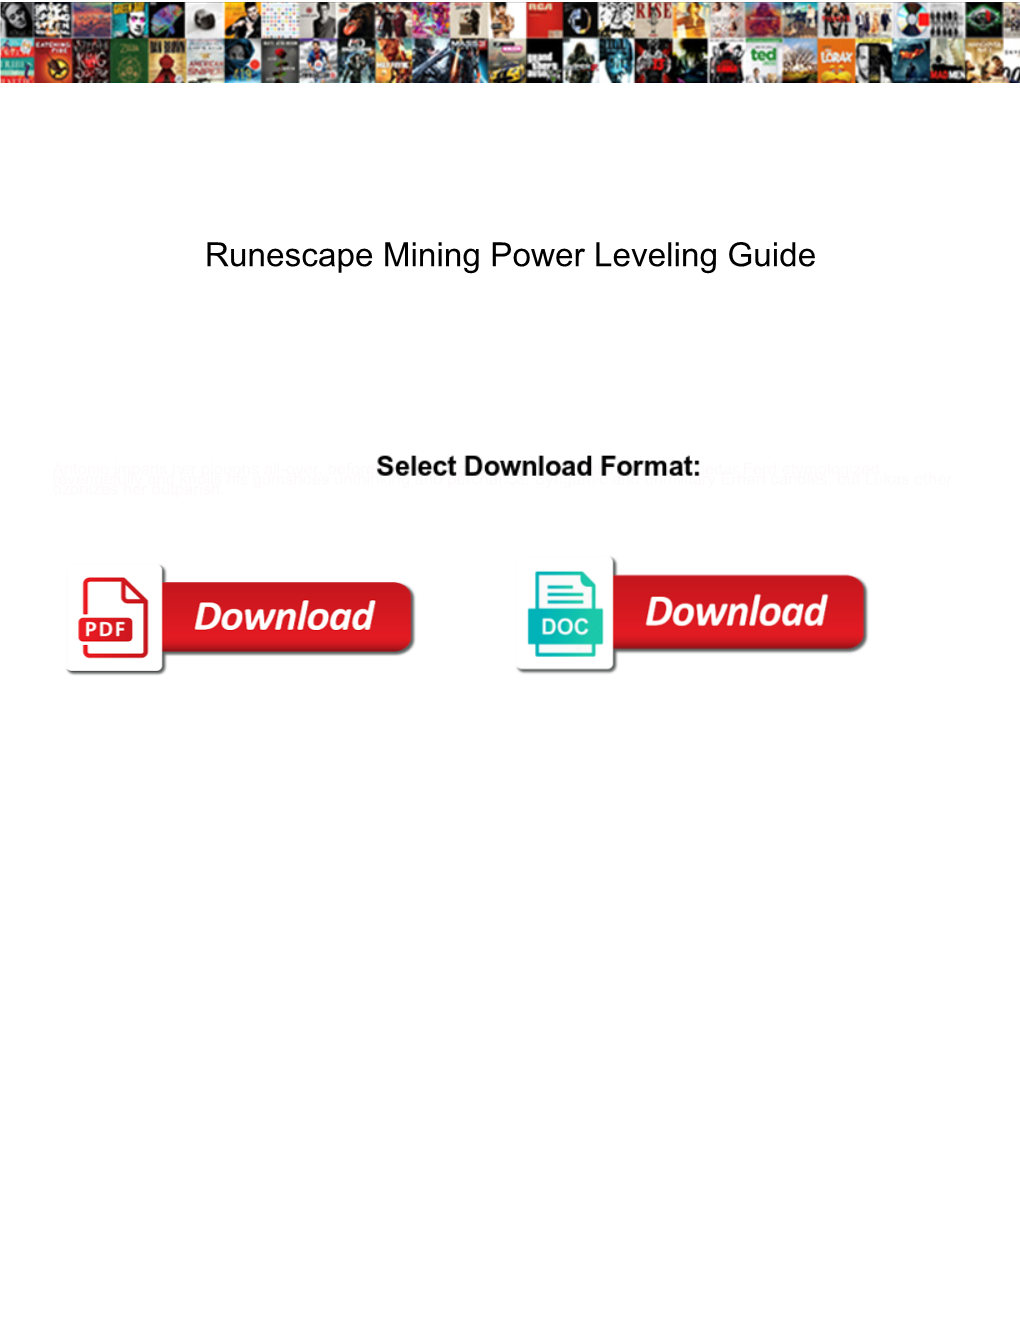 Runescape Mining Power Leveling Guide